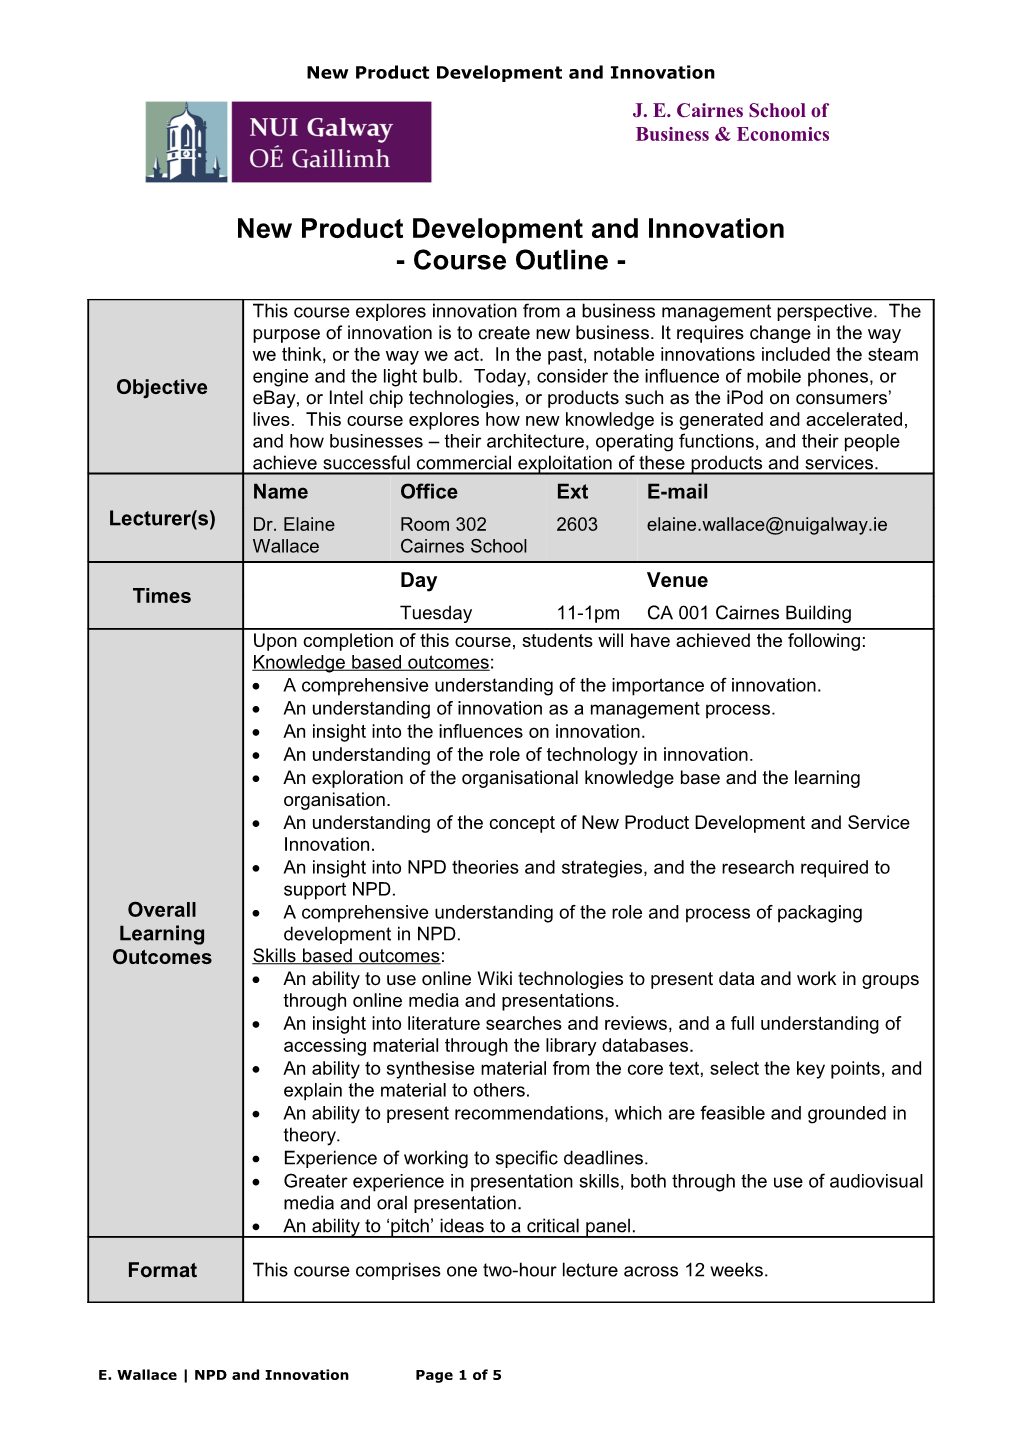 New Product Development and Innovation